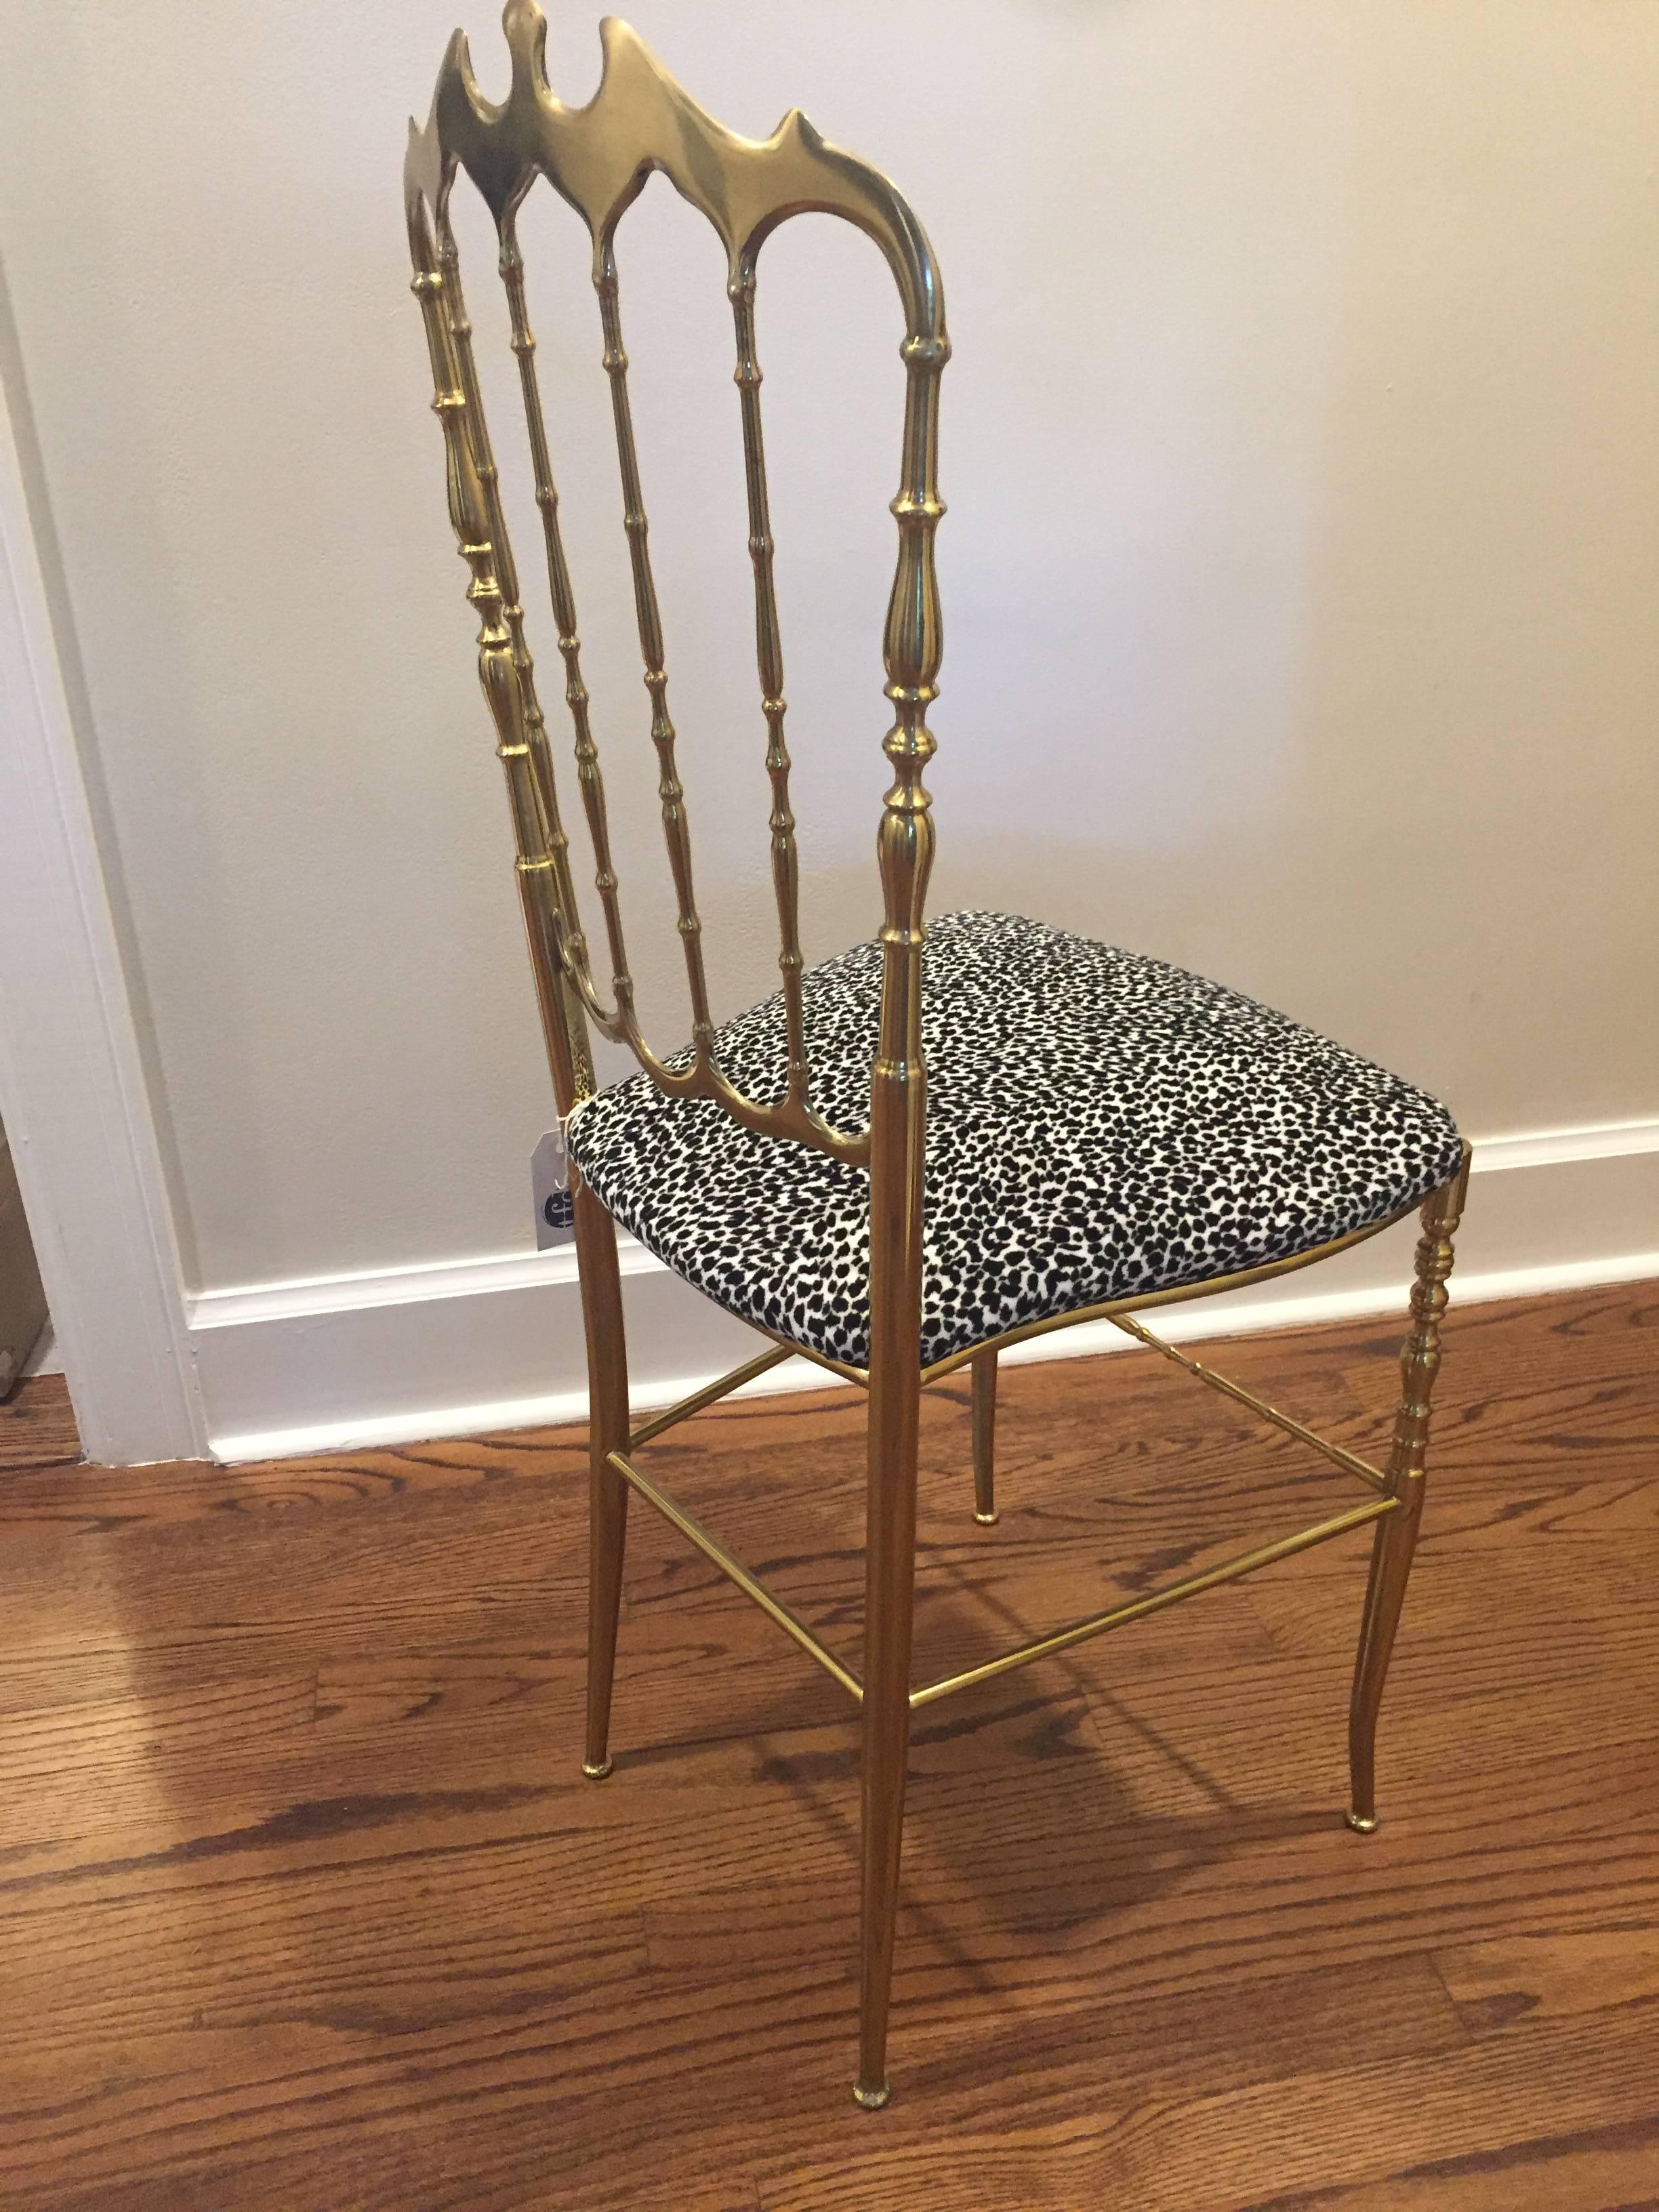 Chiavari Polished Brass Chair In Excellent Condition For Sale In Wichita, KS